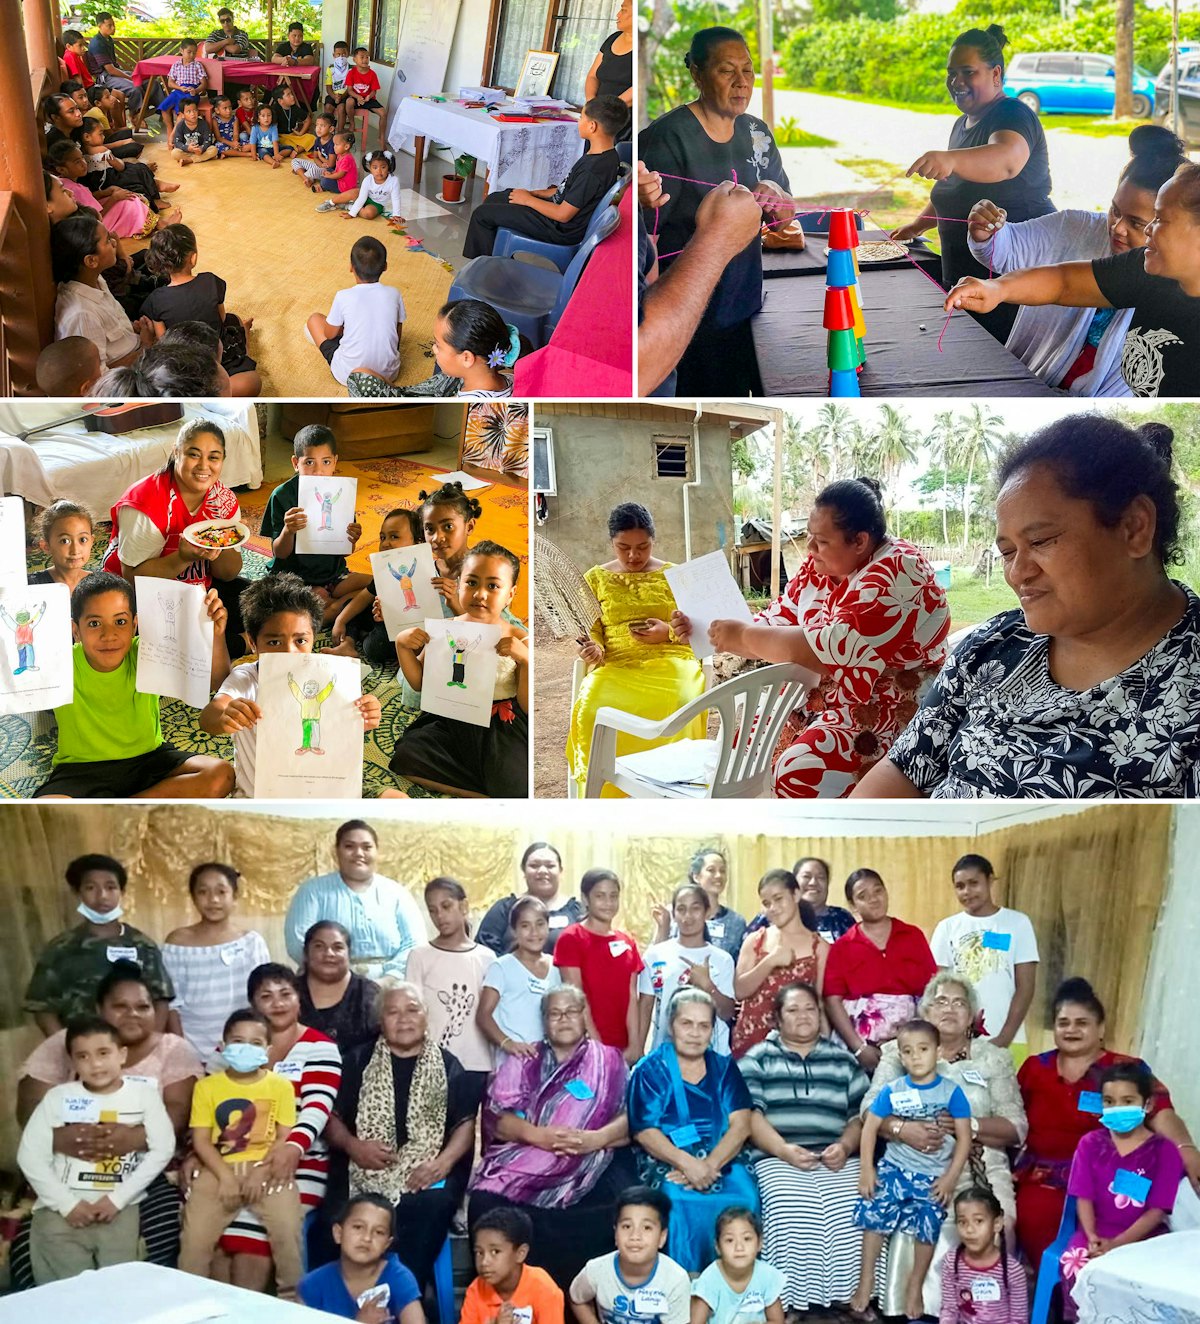 Pictured here are a few of the many gatherings being held throughout Tonga as part of the global series of conferences.